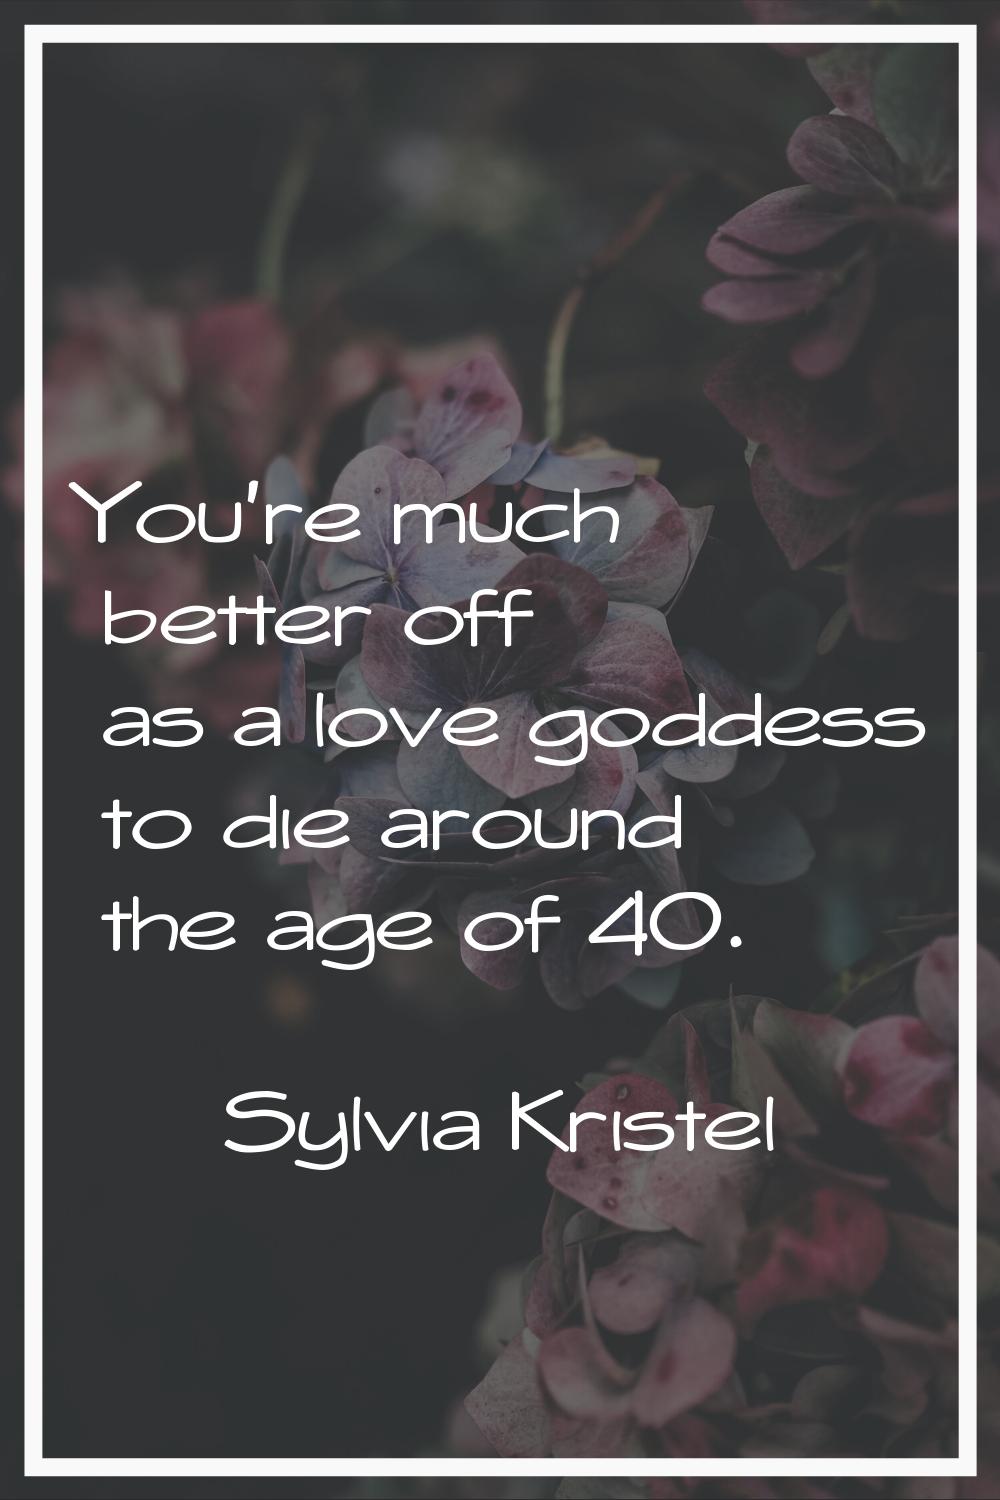 You're much better off as a love goddess to die around the age of 40.